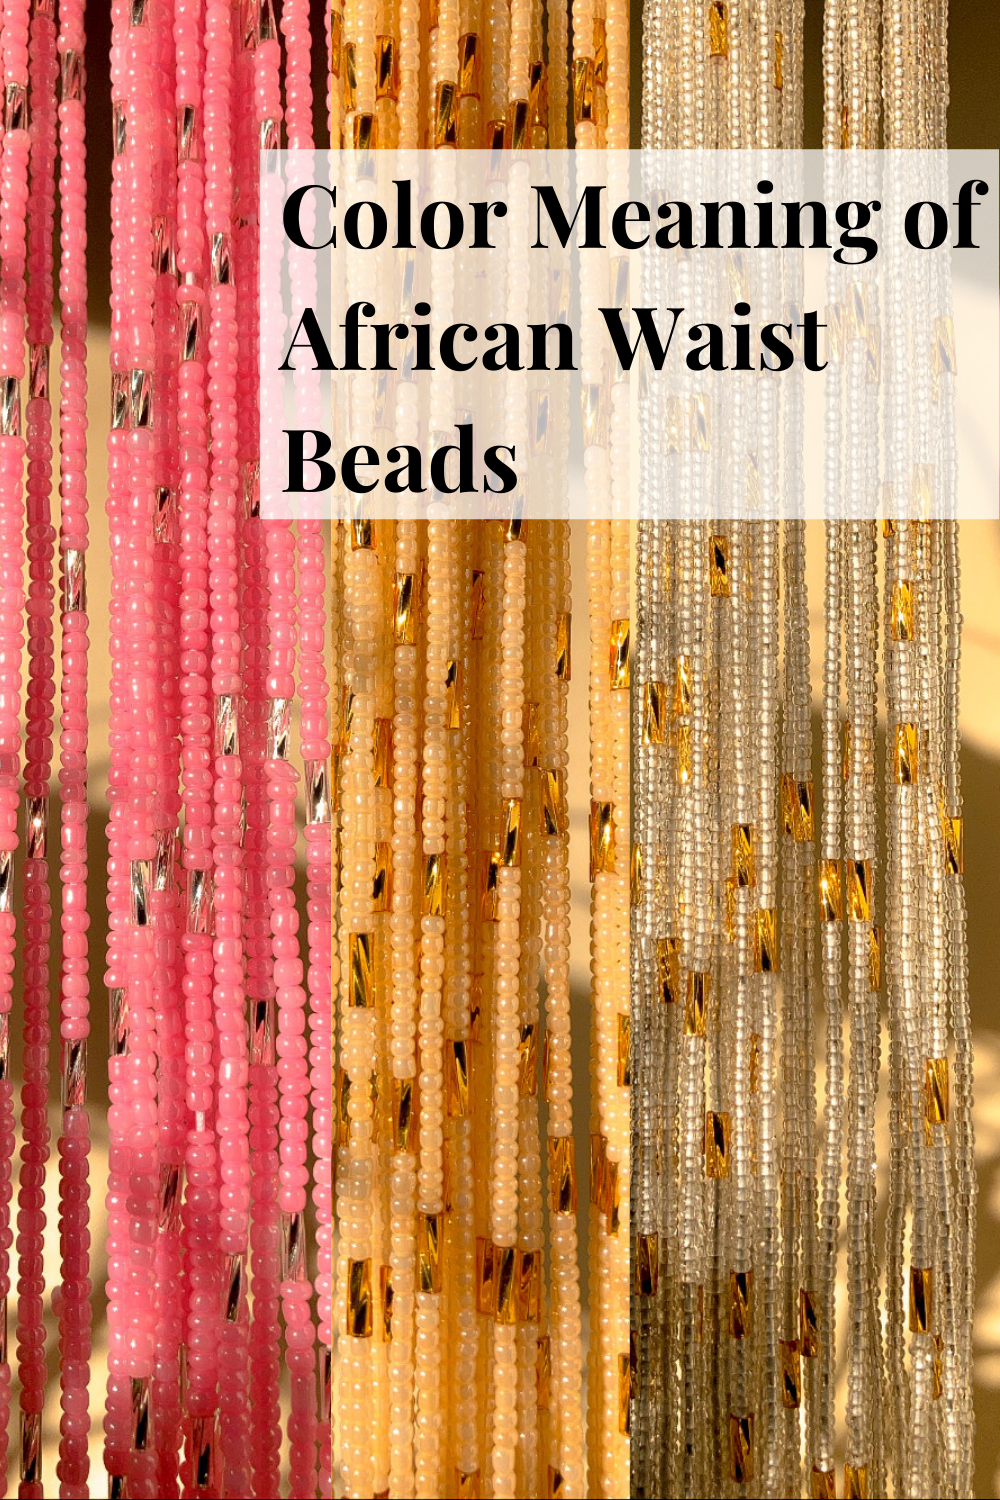 African Waist Beads Color Meaning